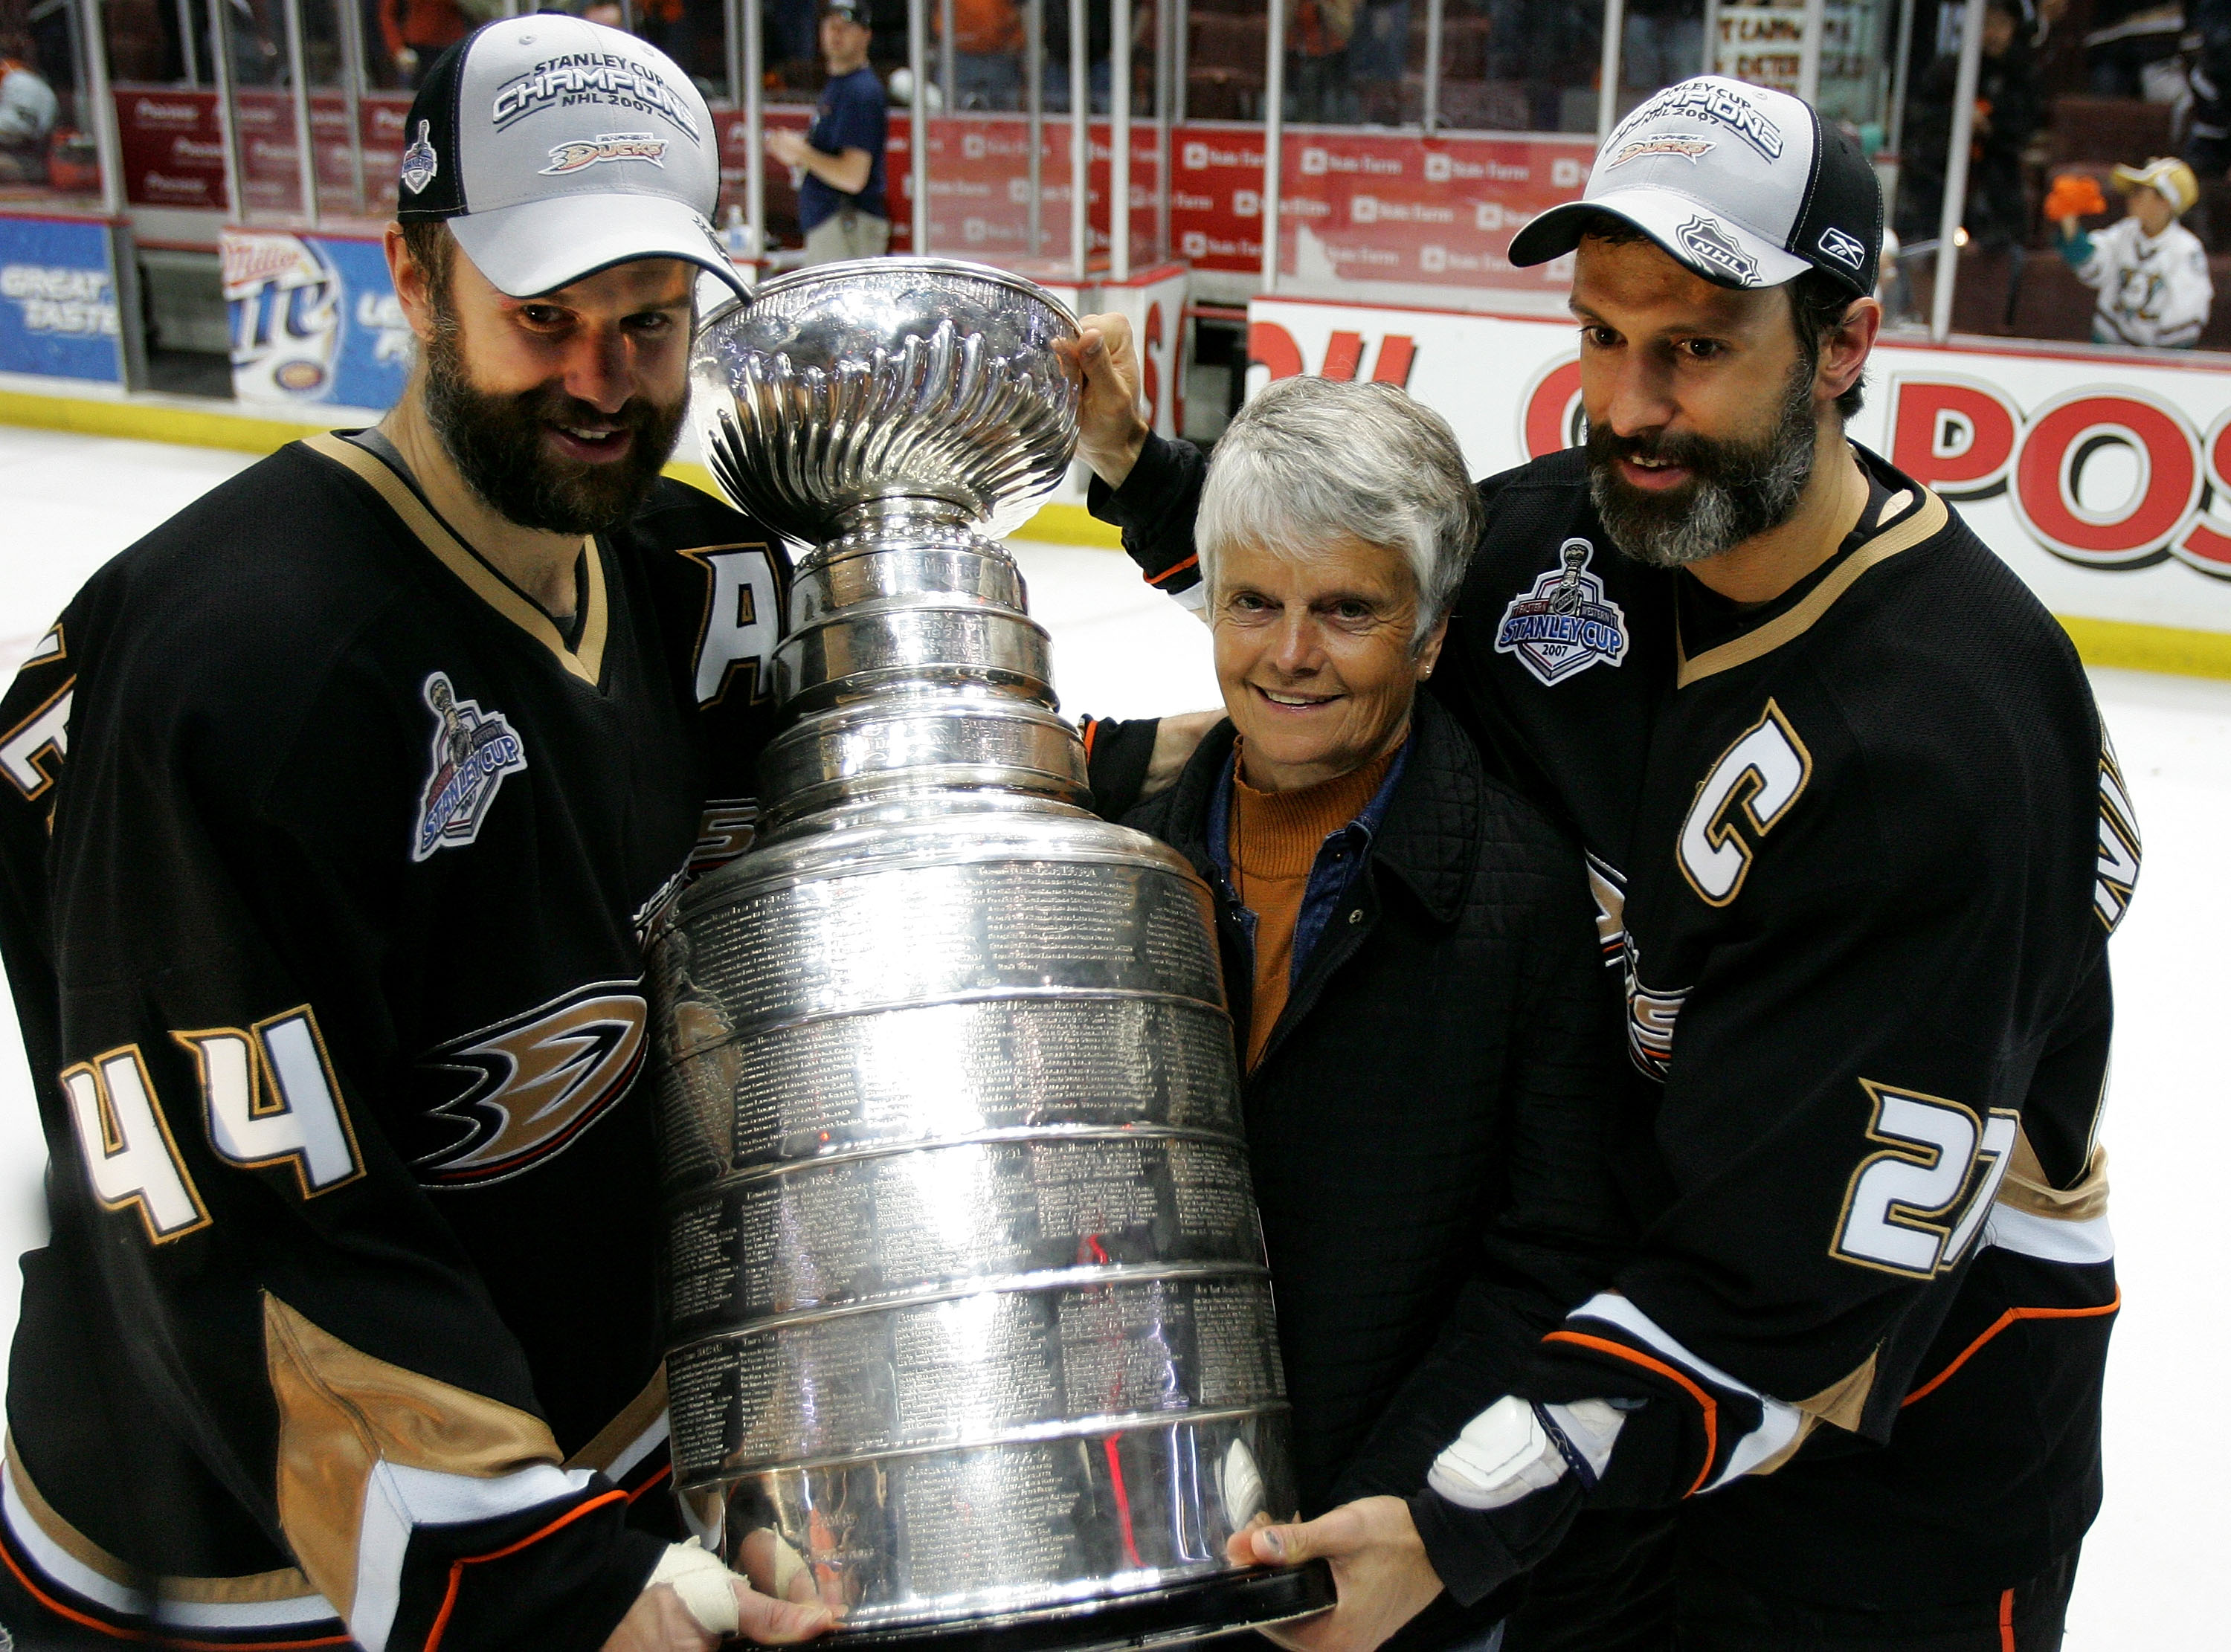 Scott Niedermayer, who led Anaheim to the Stanley Cup in 2007 and